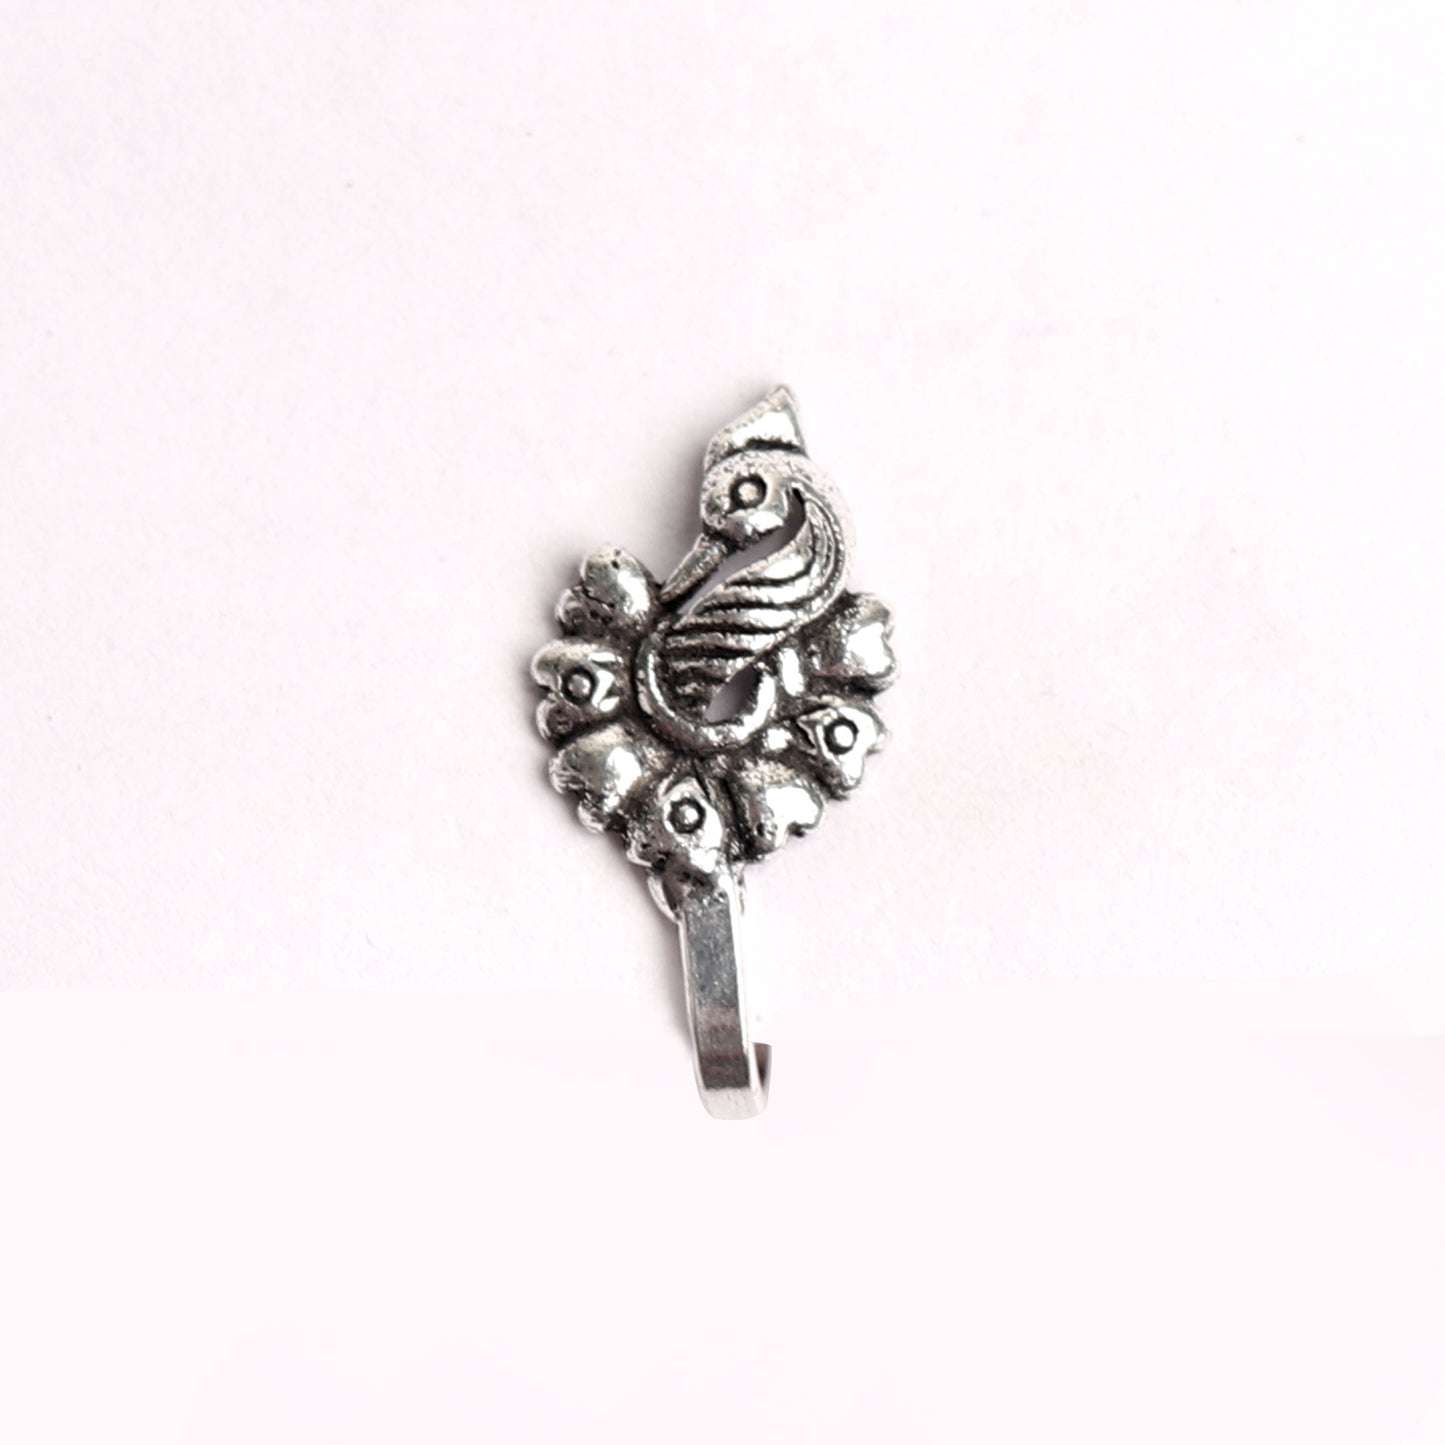 Nose Pin,Winged Nose Pin - Cippele Multi Store